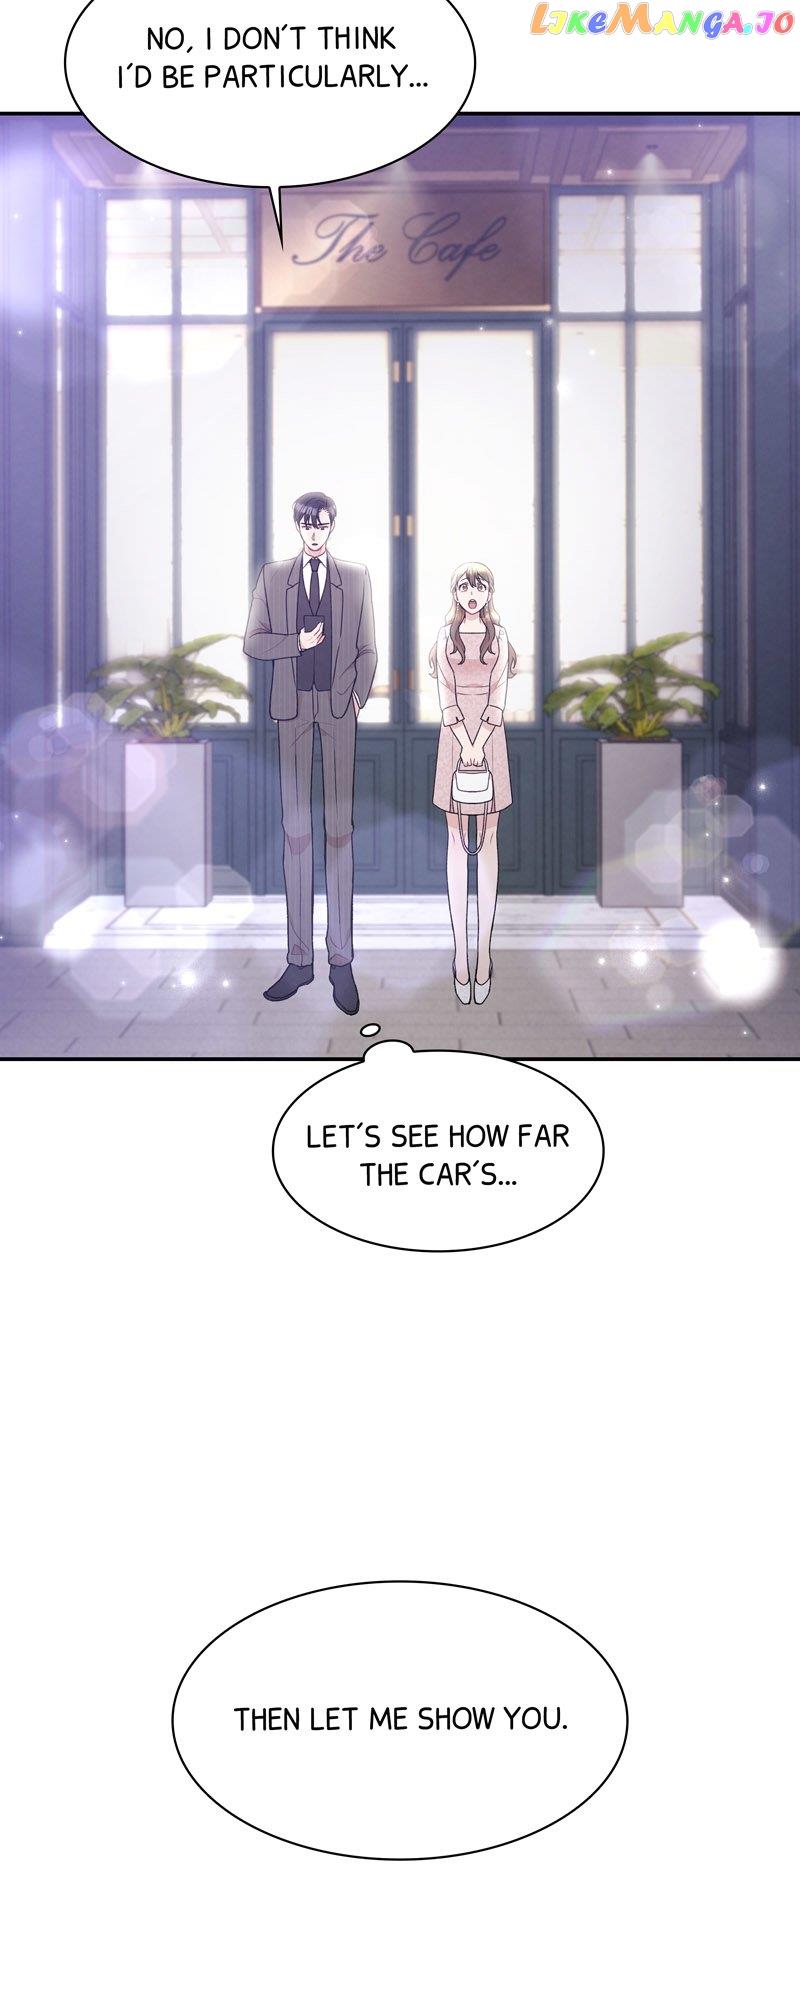 My Bosss’s Perfect Wedding chapter 8